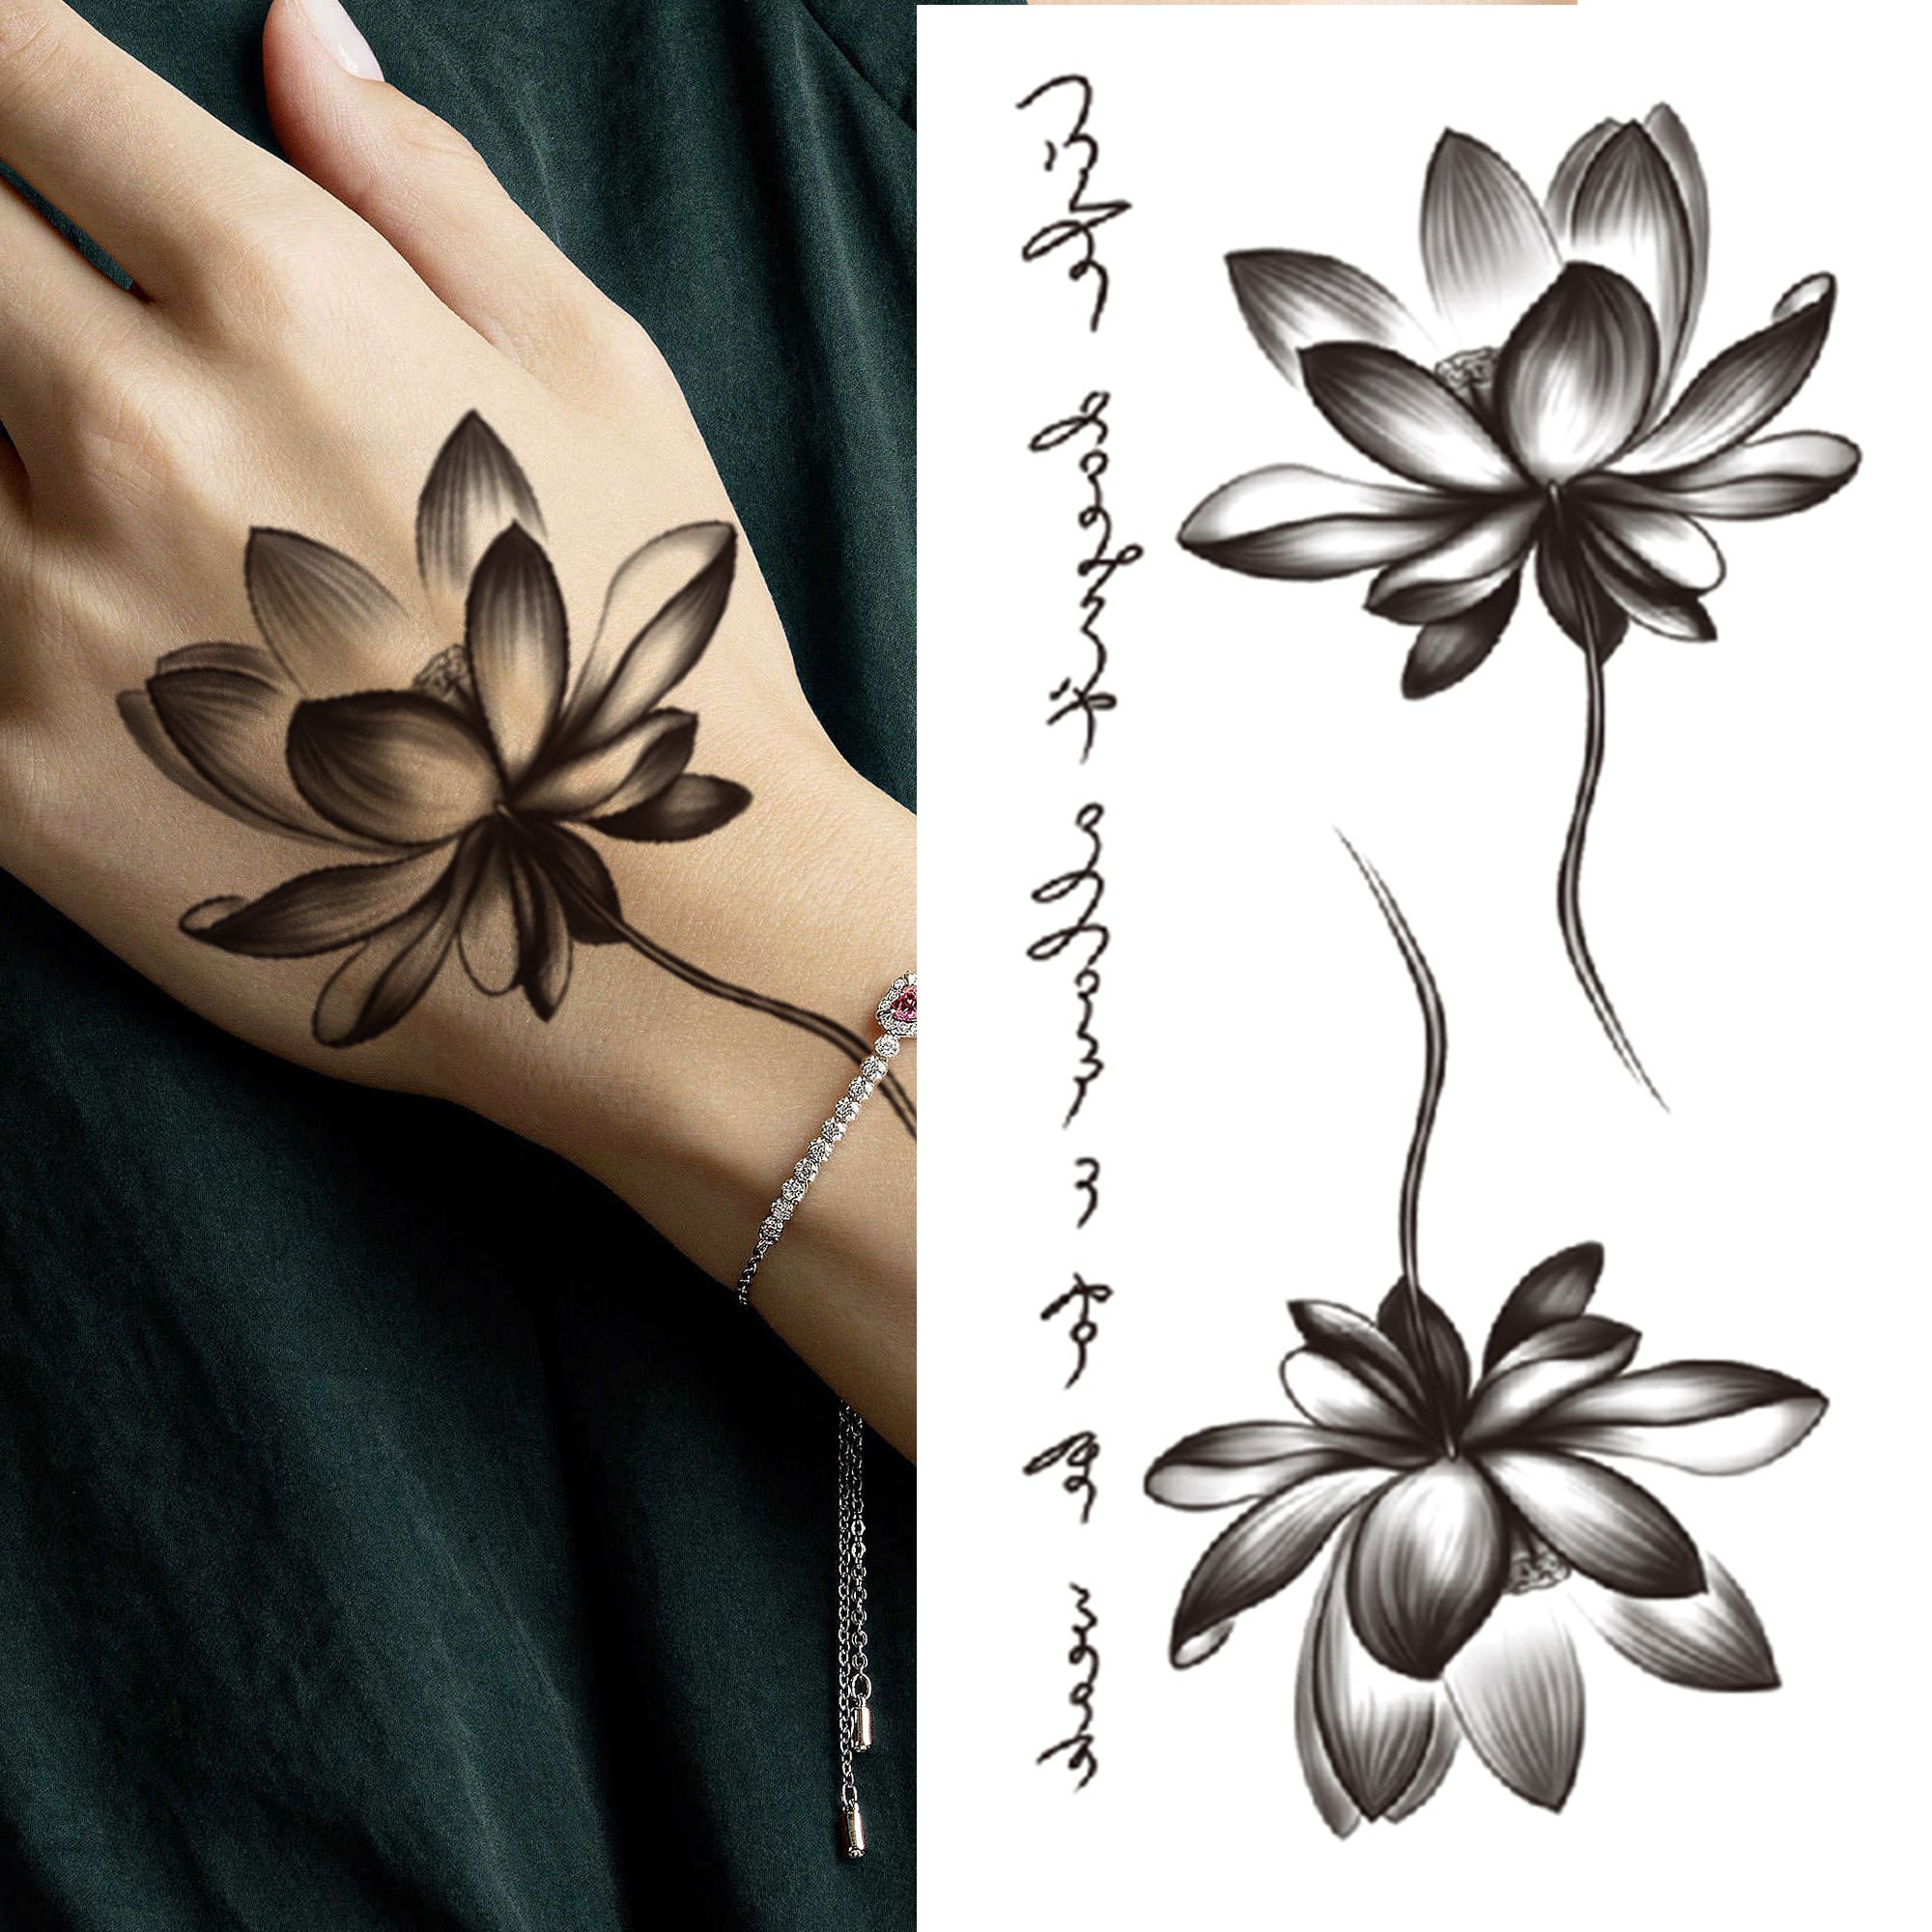 

Waterproof Temporary Tattoos Sticker tattoo Stickers For Women Girls arm Snake Peony Lily Rose Chains Lotus Flower Black Blossom Fake sleeve Transferable Tatoo